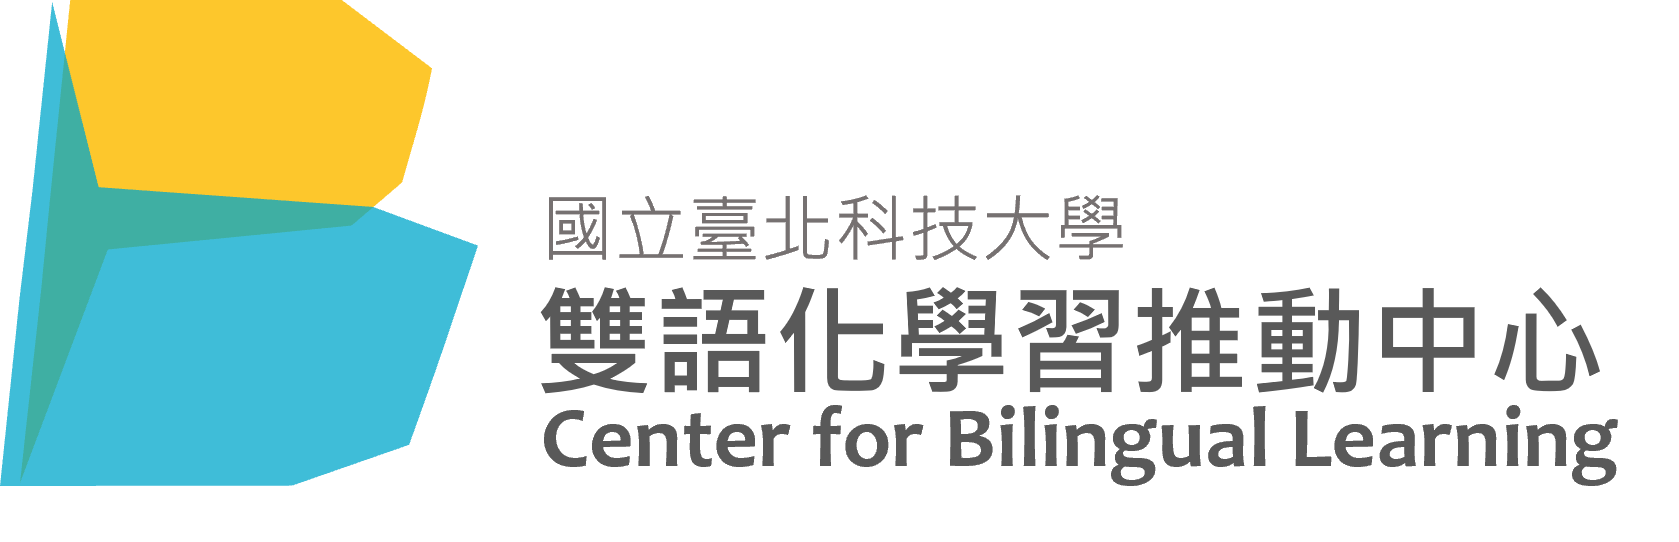 Center for Bilingual Learning